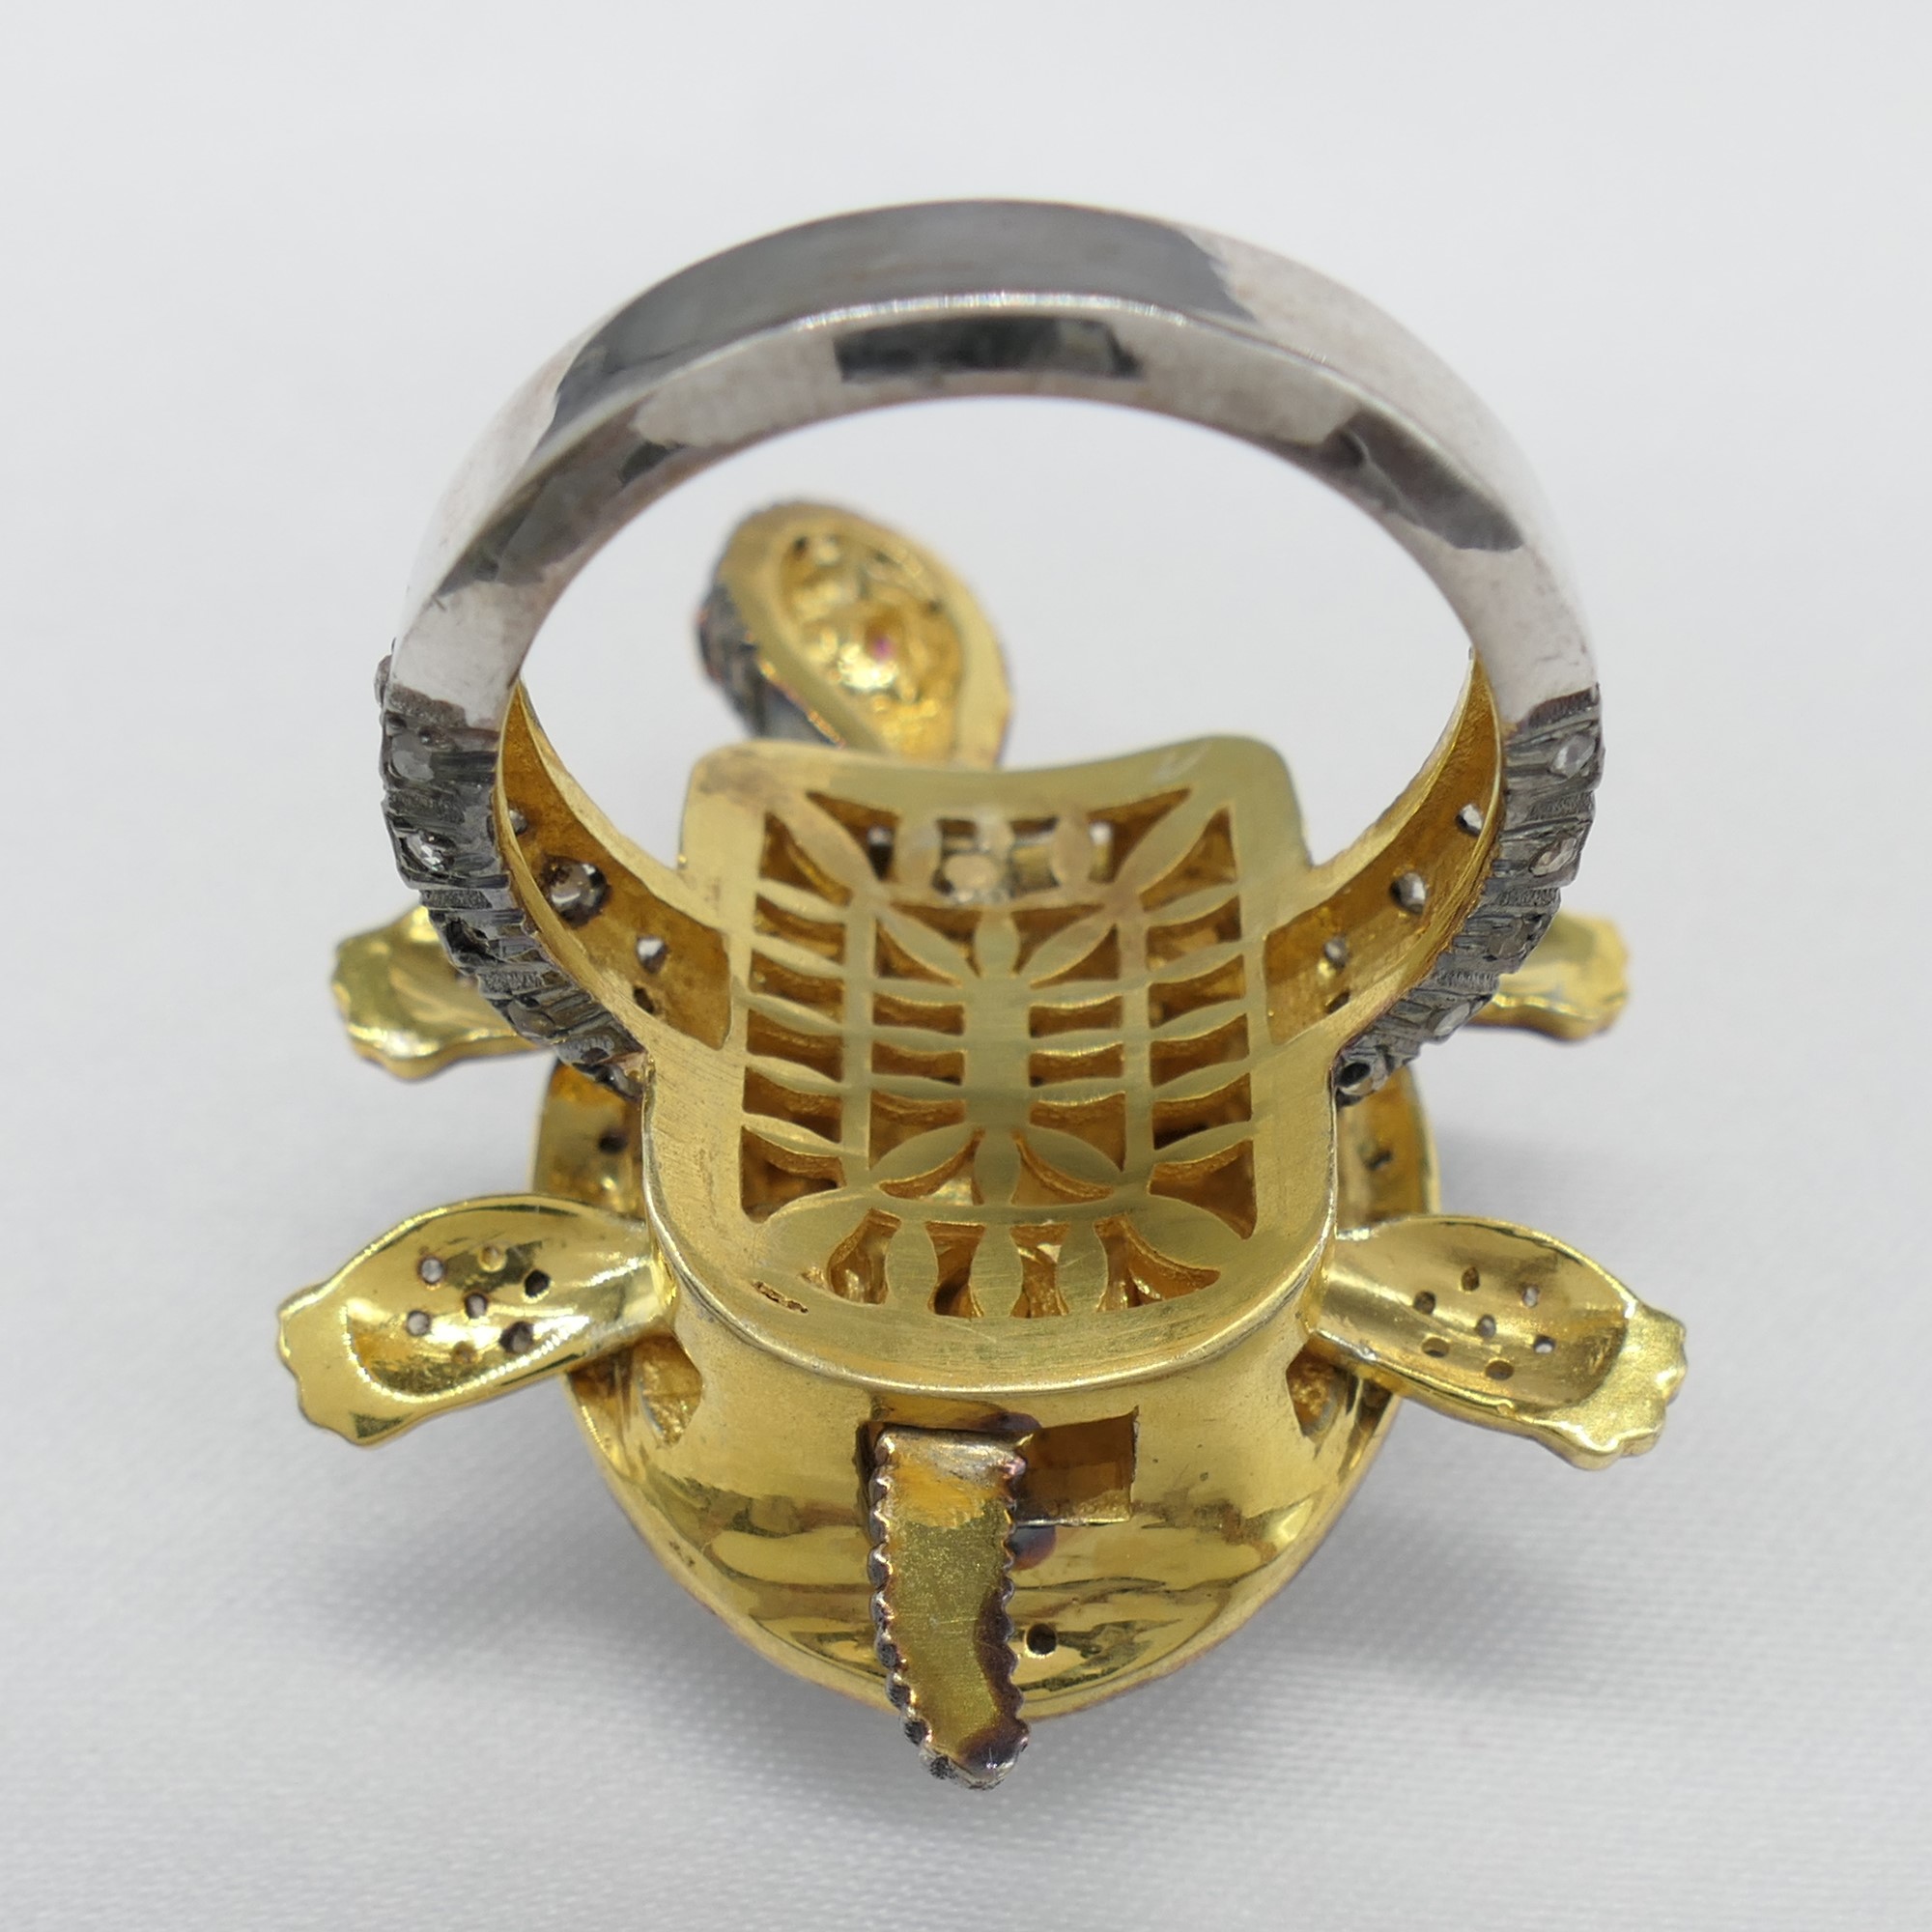 Distinctive 1.30 Carat Diamond and Ruby Tortoise Ring With Movable Body Parts - Image 5 of 6